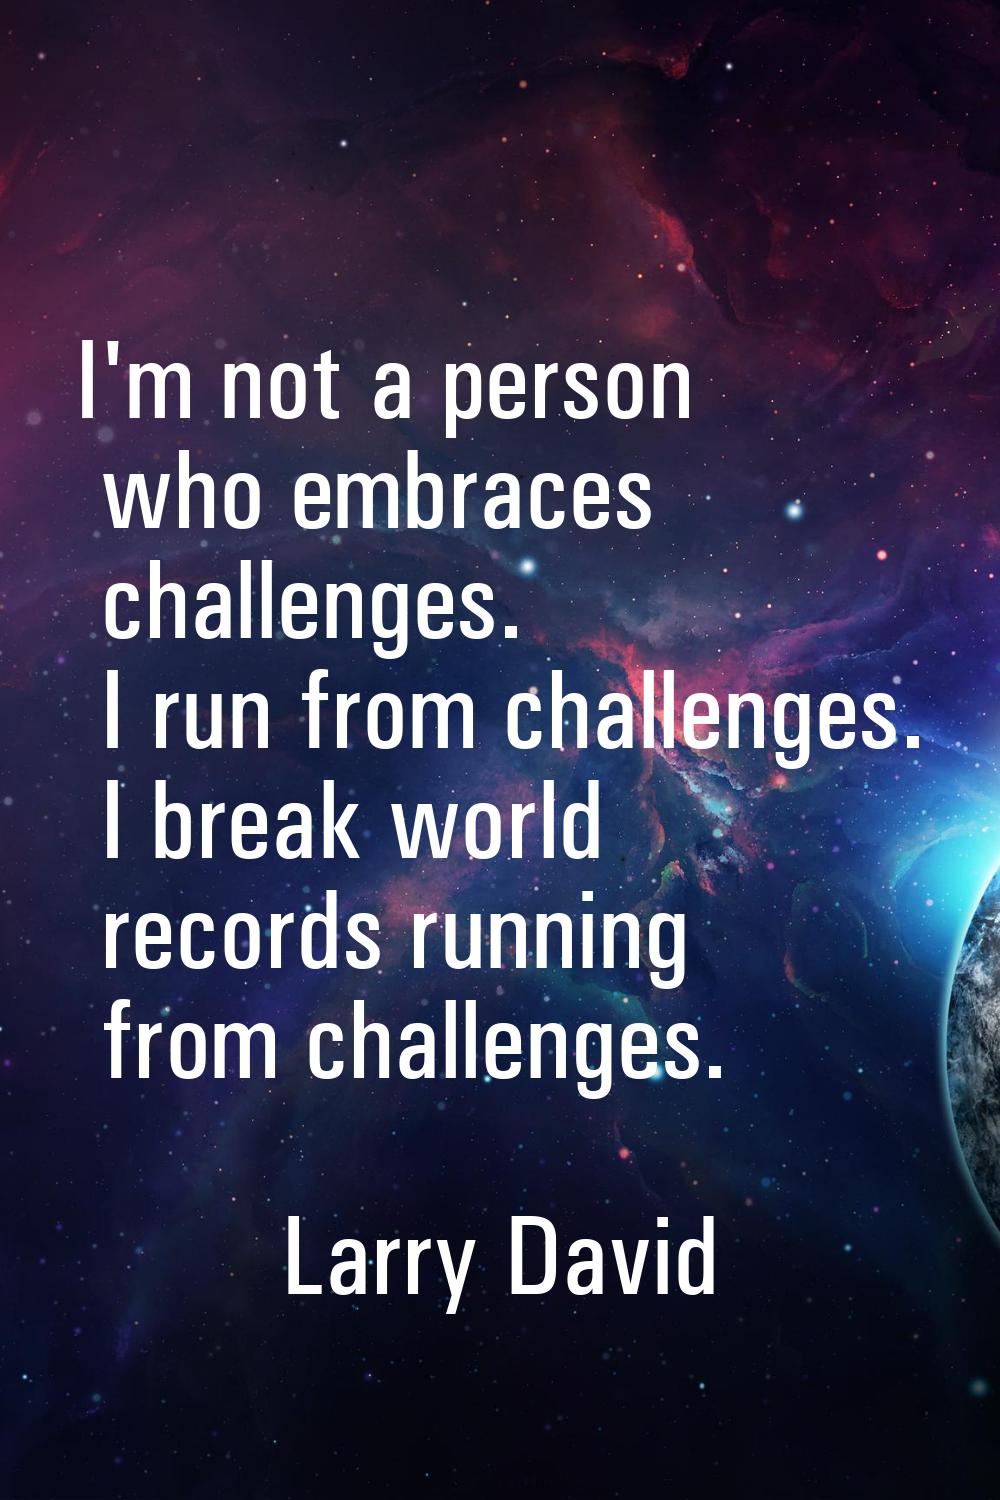 I'm not a person who embraces challenges. I run from challenges. I break world records running from